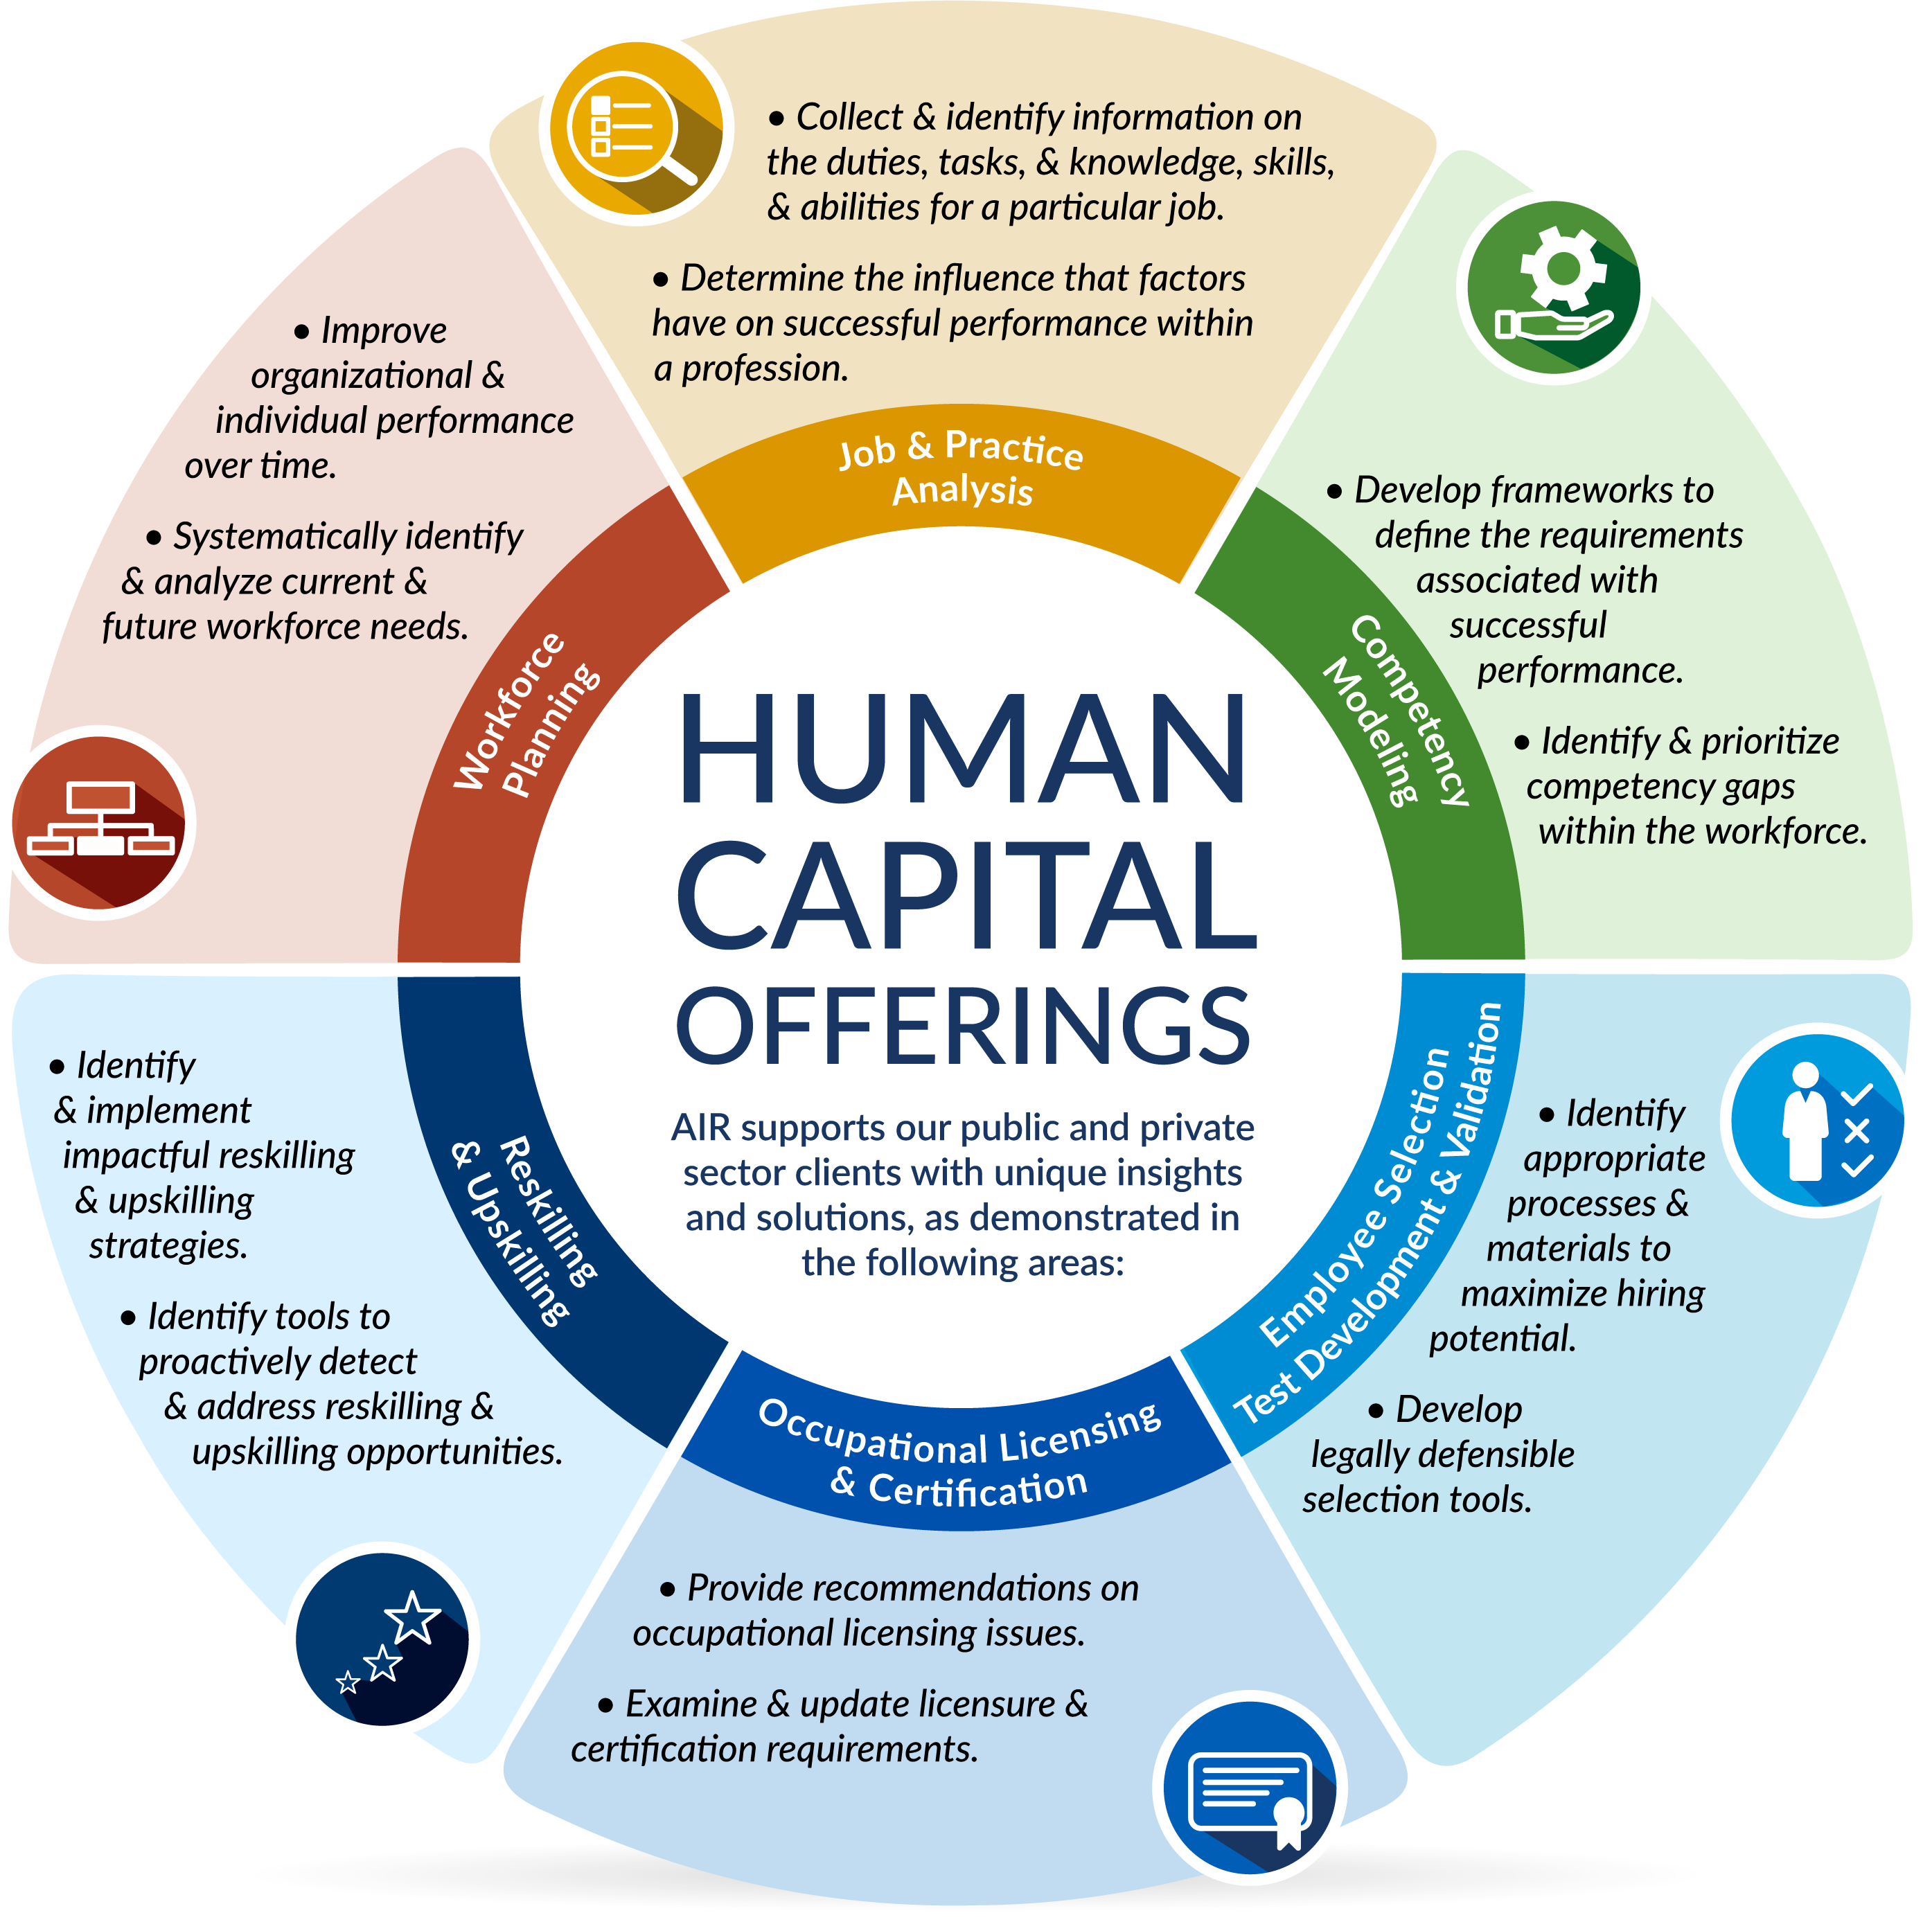 Infographic: Human Capital Offerings at AIR